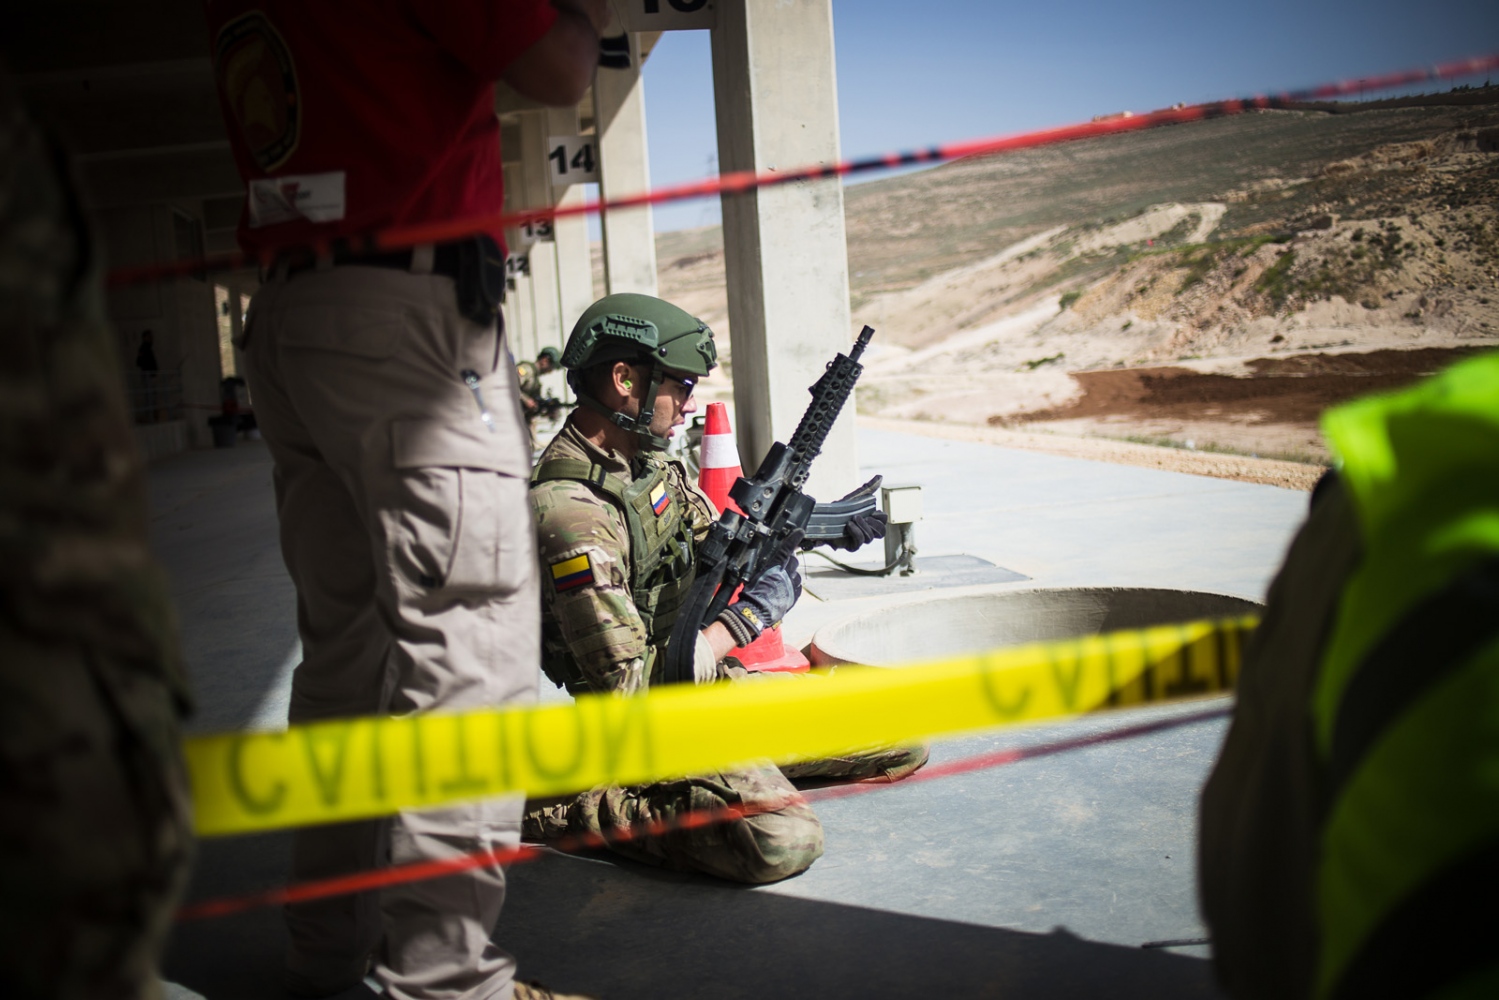  The Colombia team participates in the desert stress shoot event in the seventh annual Warrior Competition at the King Abdullah II Special Operations Training Center near Amman, Jordan, on April 21, 2015. 